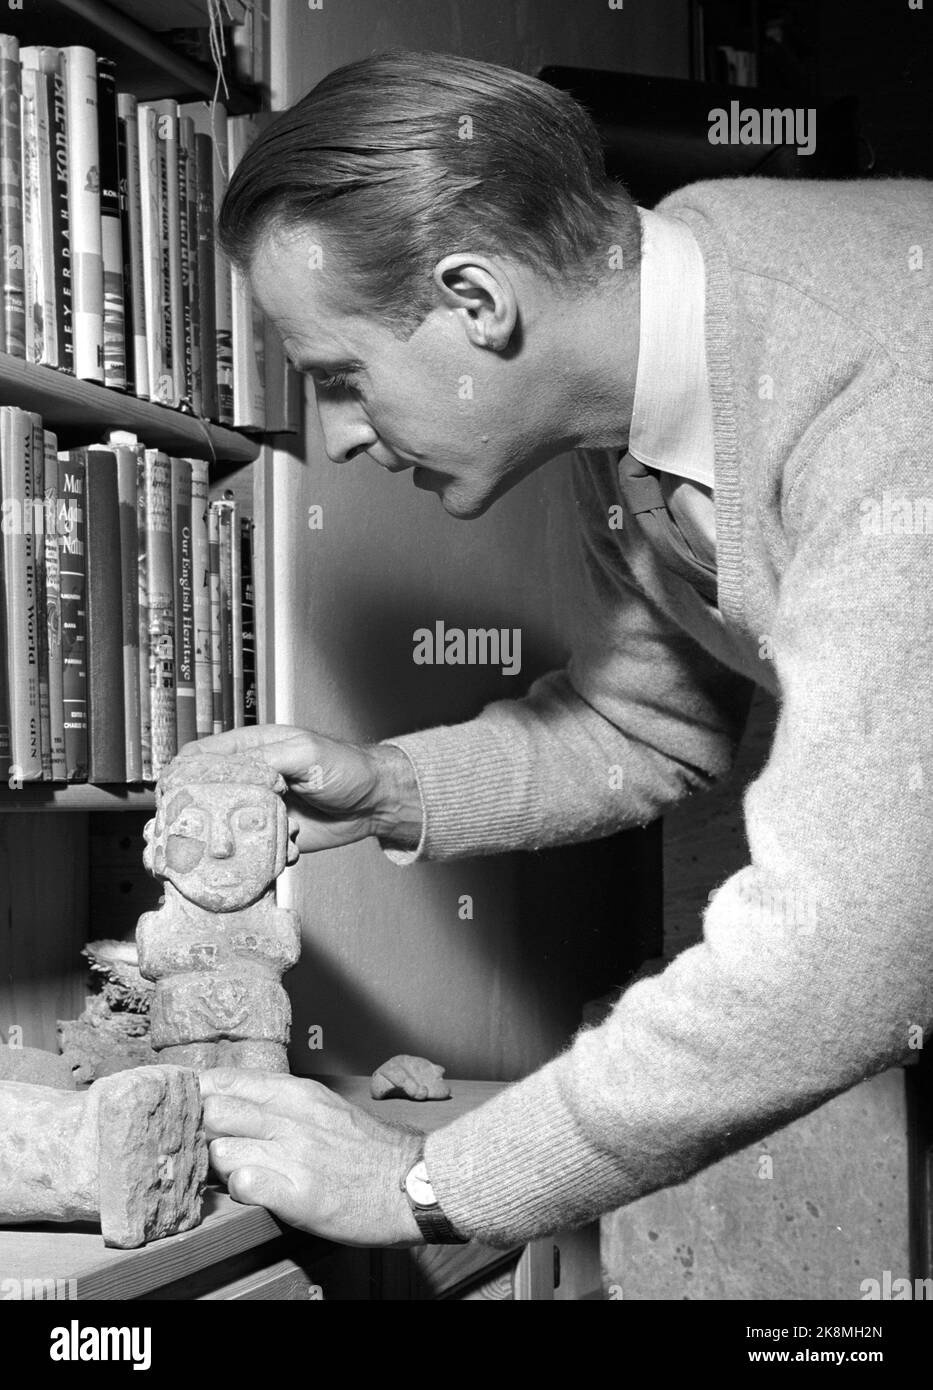 Oslo 1955. Ethnographer Thor Heyerdahl with one of the many stone figures he has homed from his expeditions. Photo: Sverre A. Børretzen / Current / NTB Stock Photo